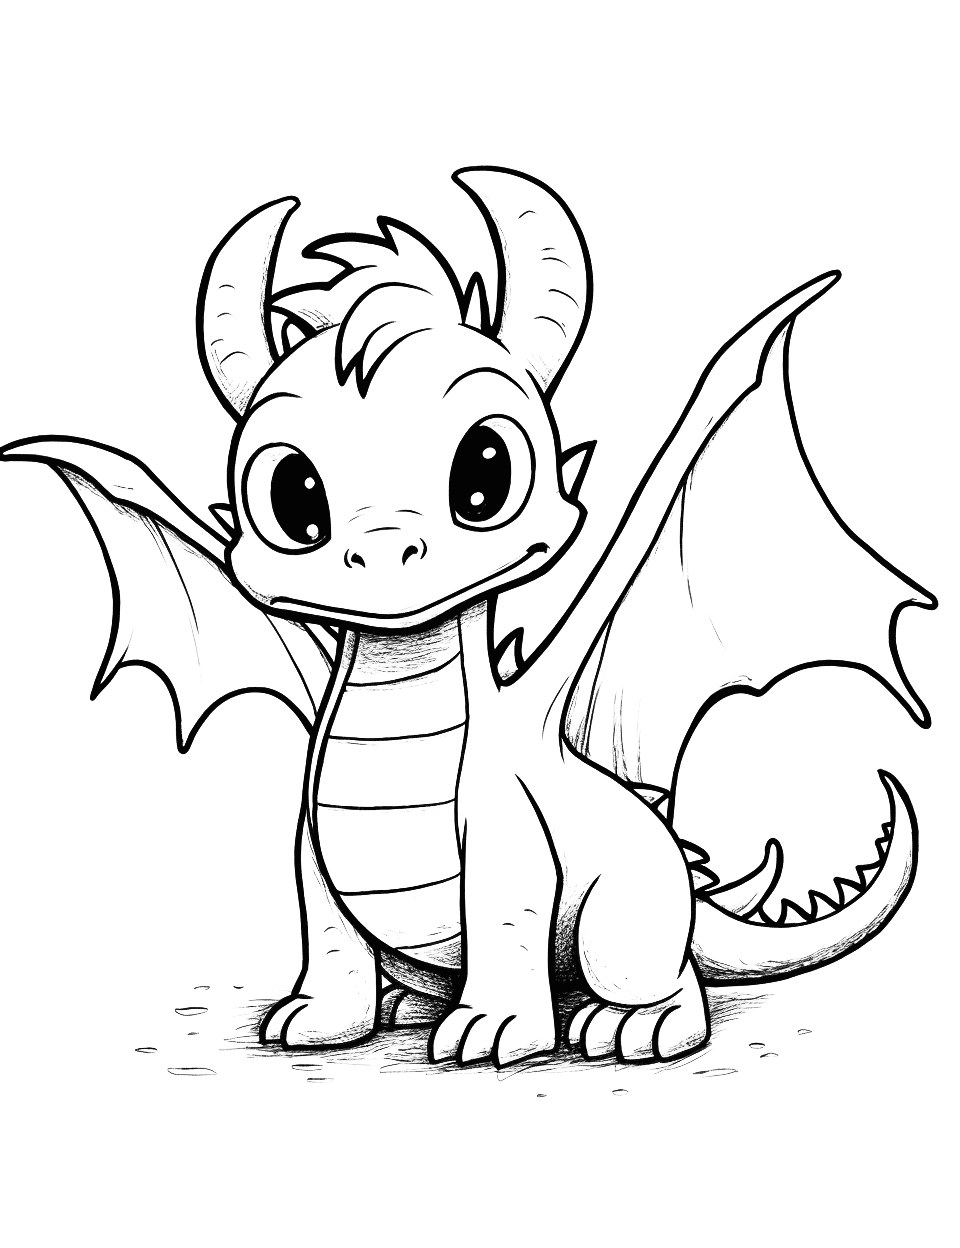 Cute Baby Dragon Coloring Page - A cute baby dragon learning to breathe fire for the first time.